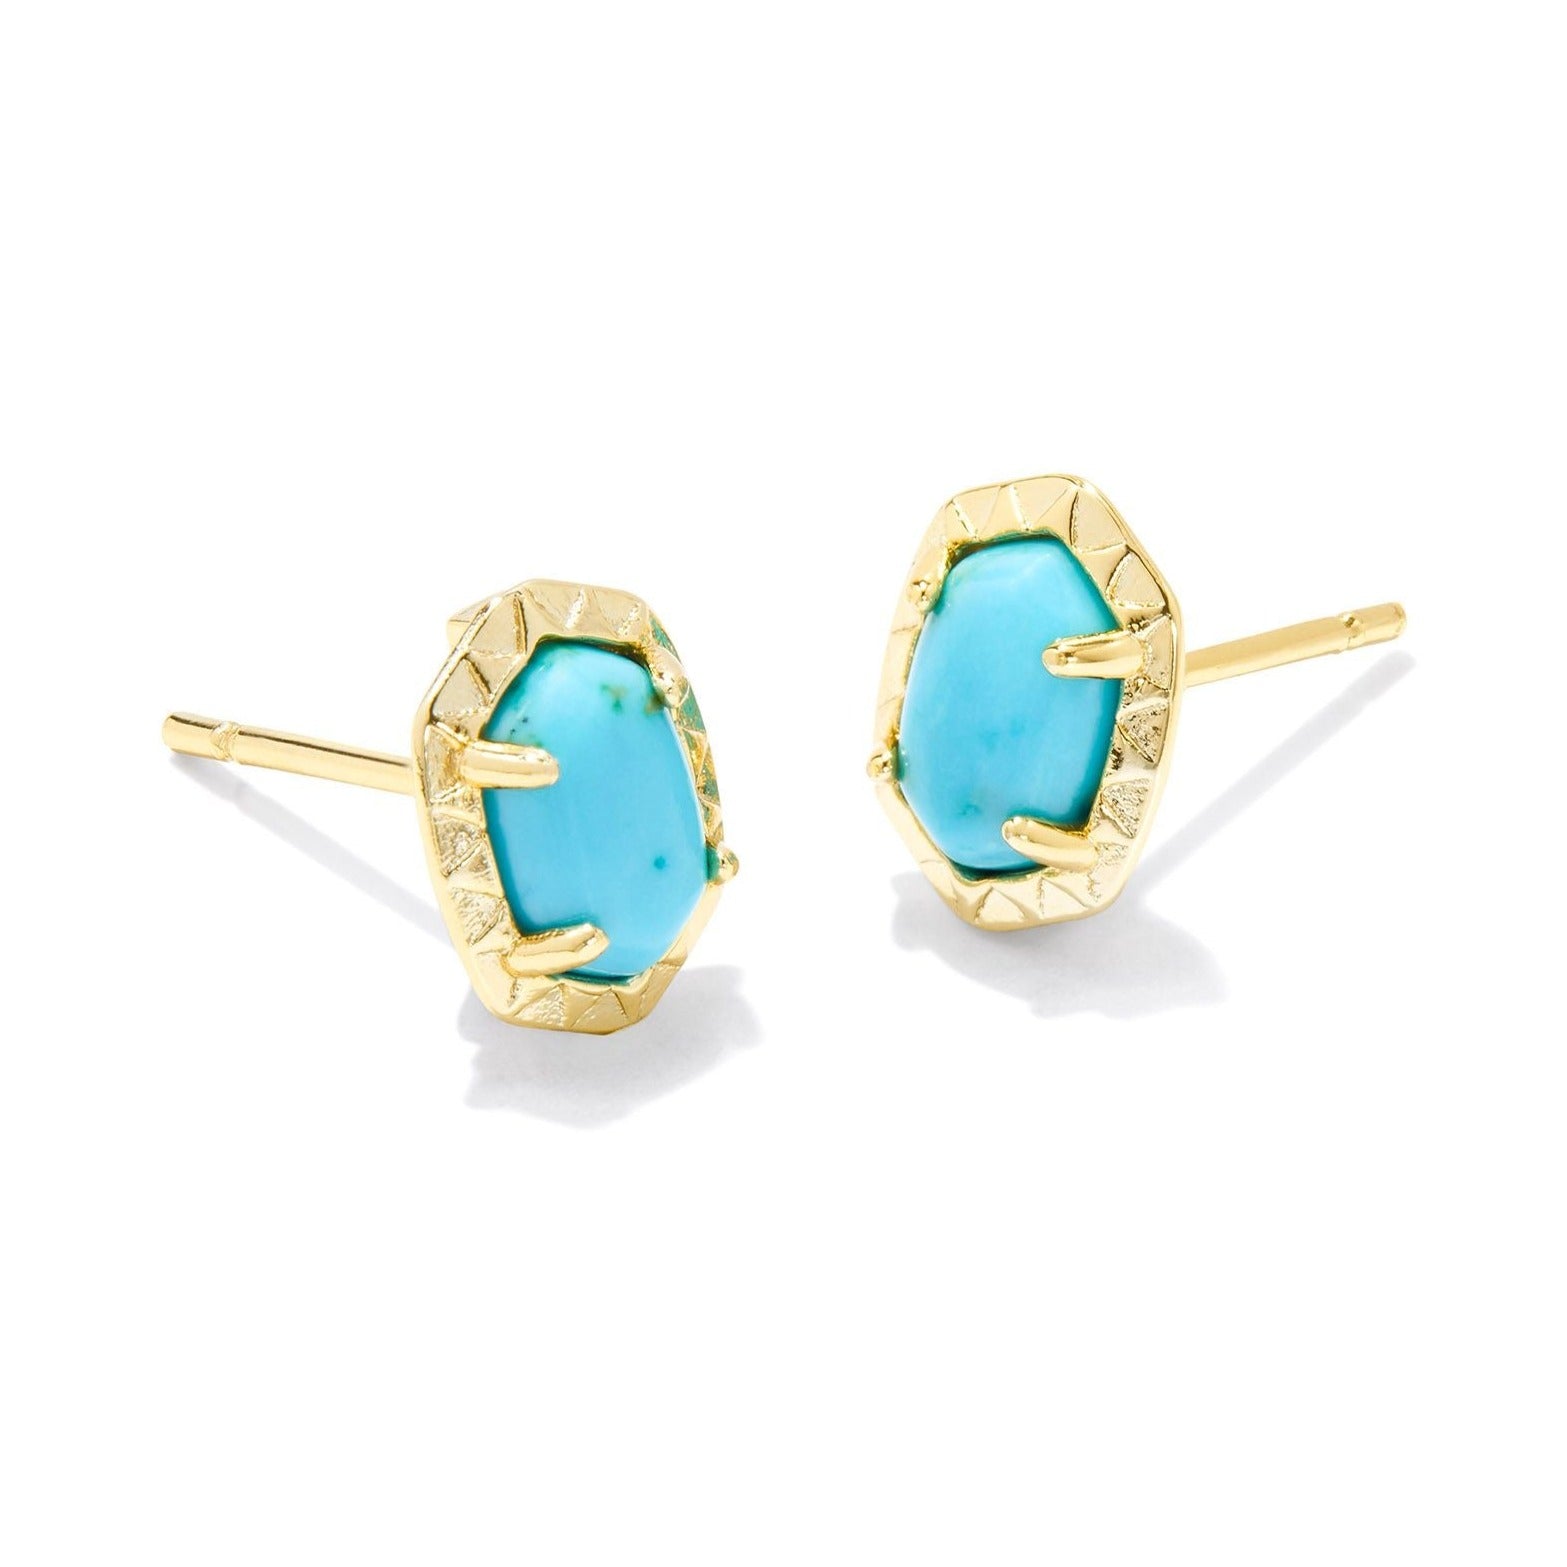 Kendra Scott | Daphne Gold Stud Earrings in Variegated Turquoise Magnesite - Giddy Up Glamour Boutique